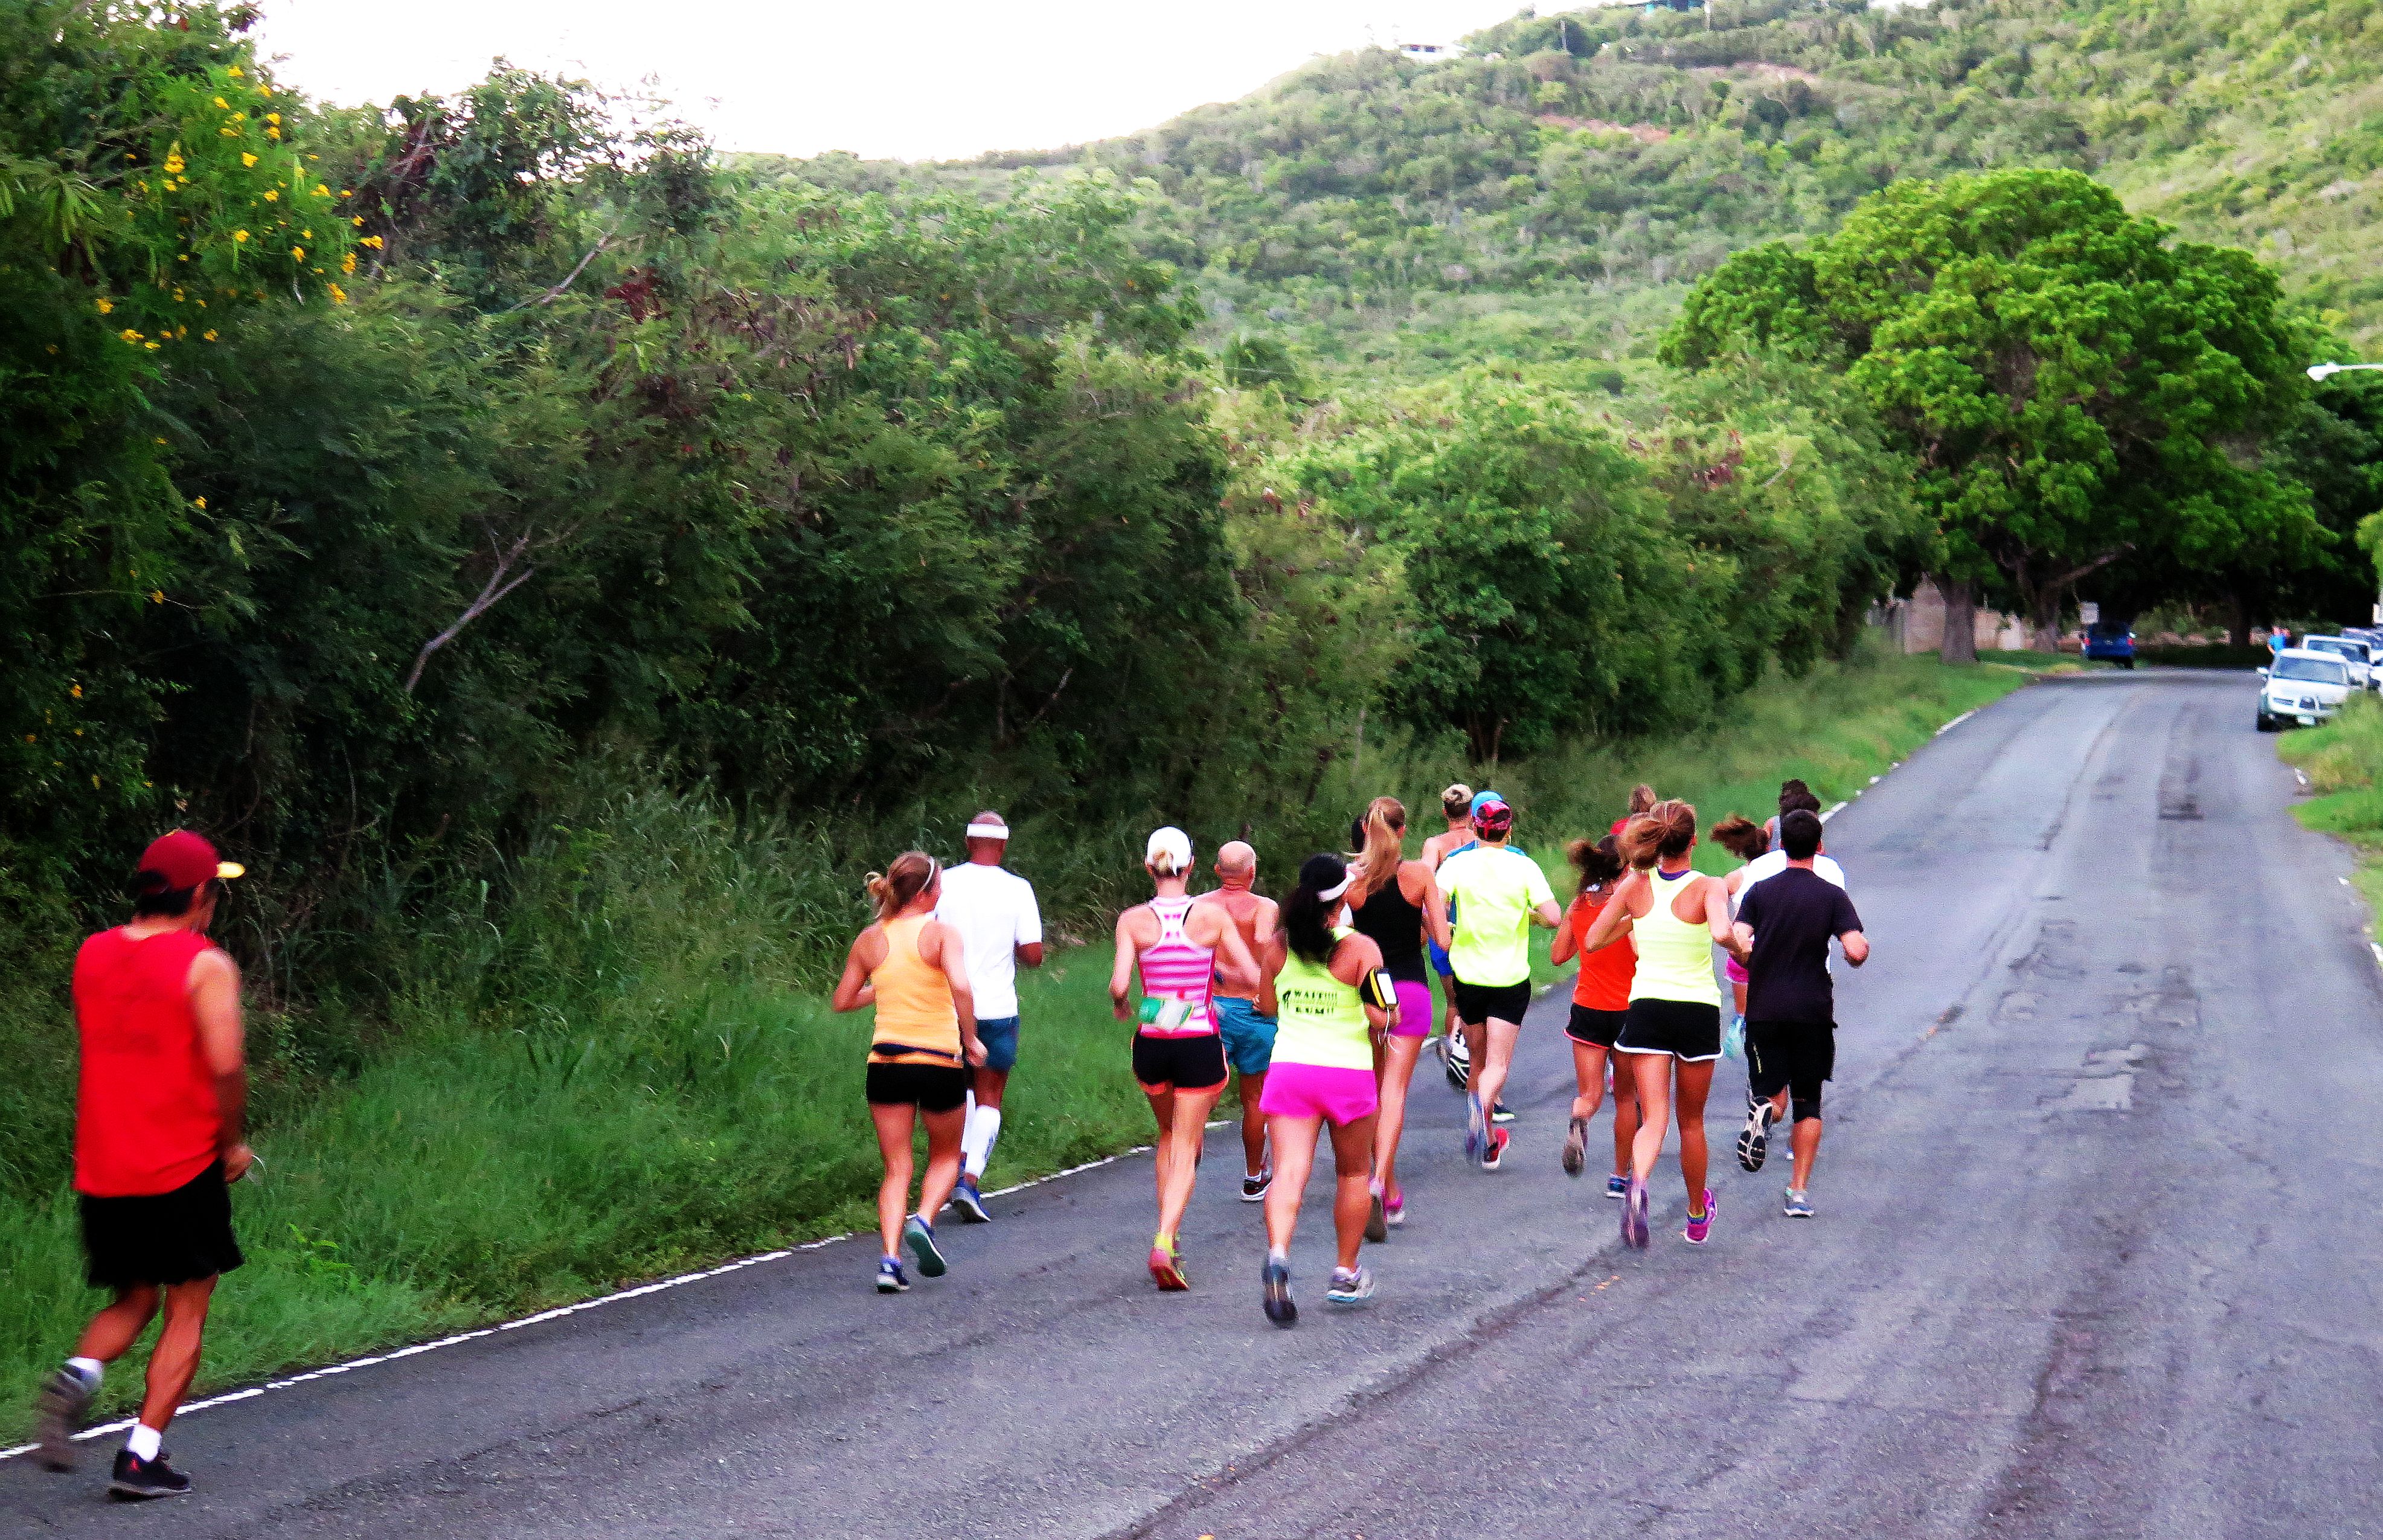 The running of the 32nd West Indies Lab 5-Mile Road Race Oct. 15